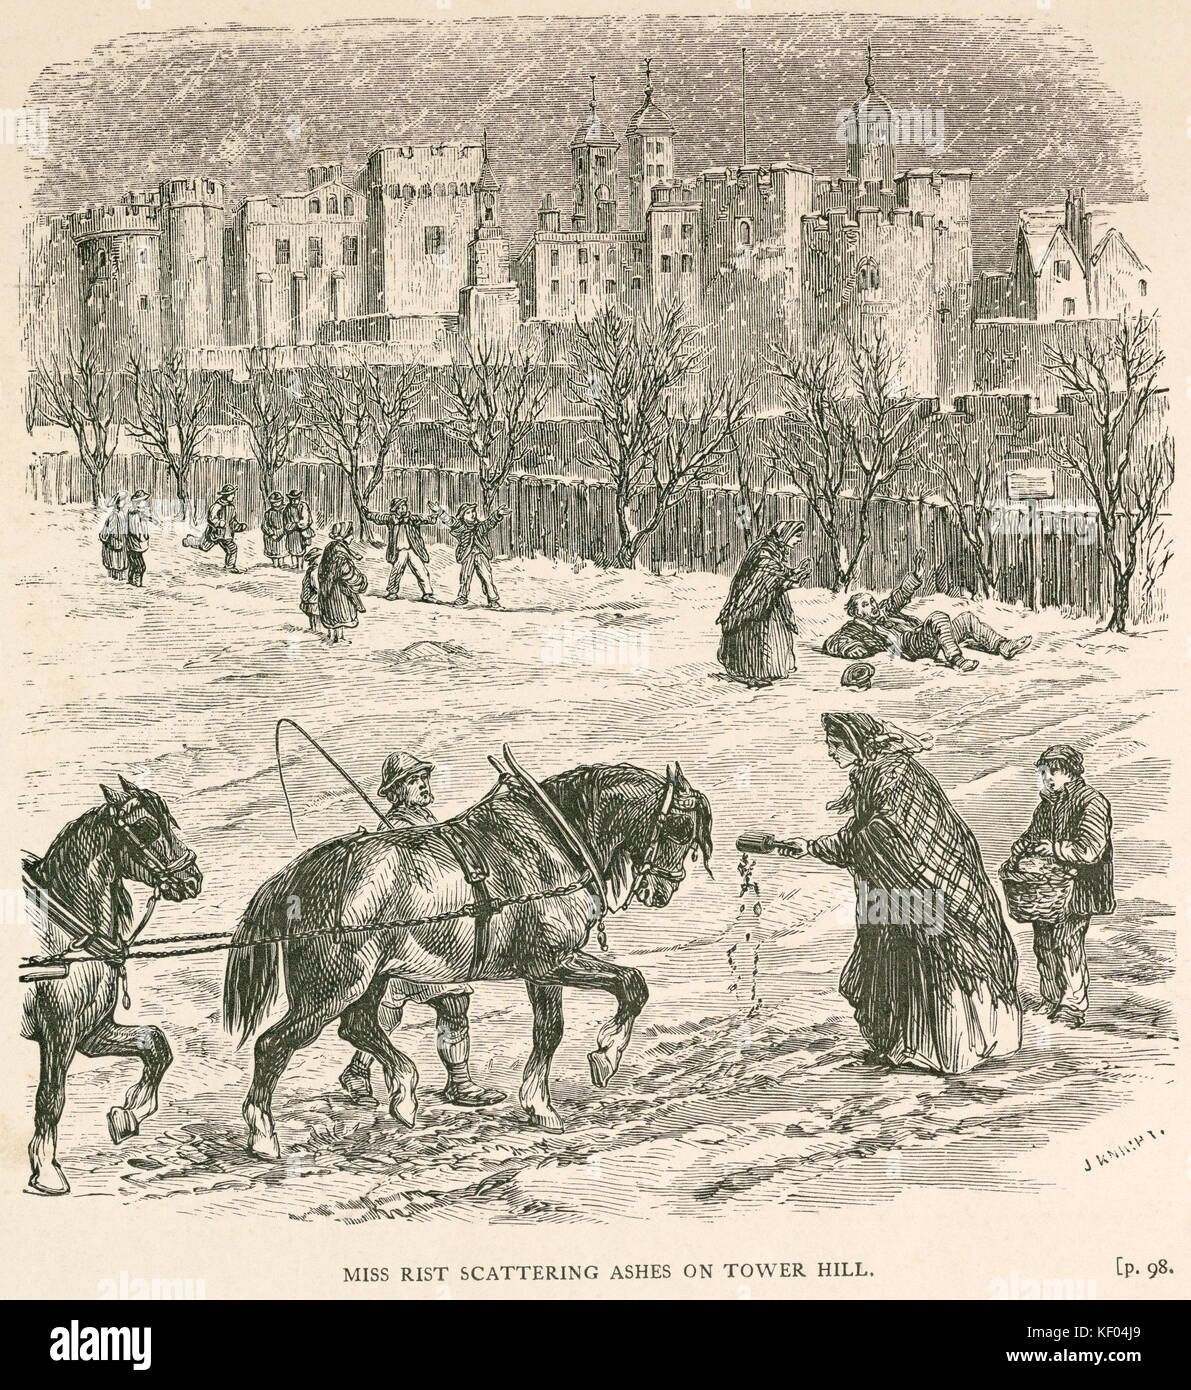 Tower Hill, London. ‘Miss Rist scattering ashes on Tower Hill' (to assist traffic in the snow). Woodcut by J. Knight, vignetted, c.1840. Mayson Beeton Stock Photo